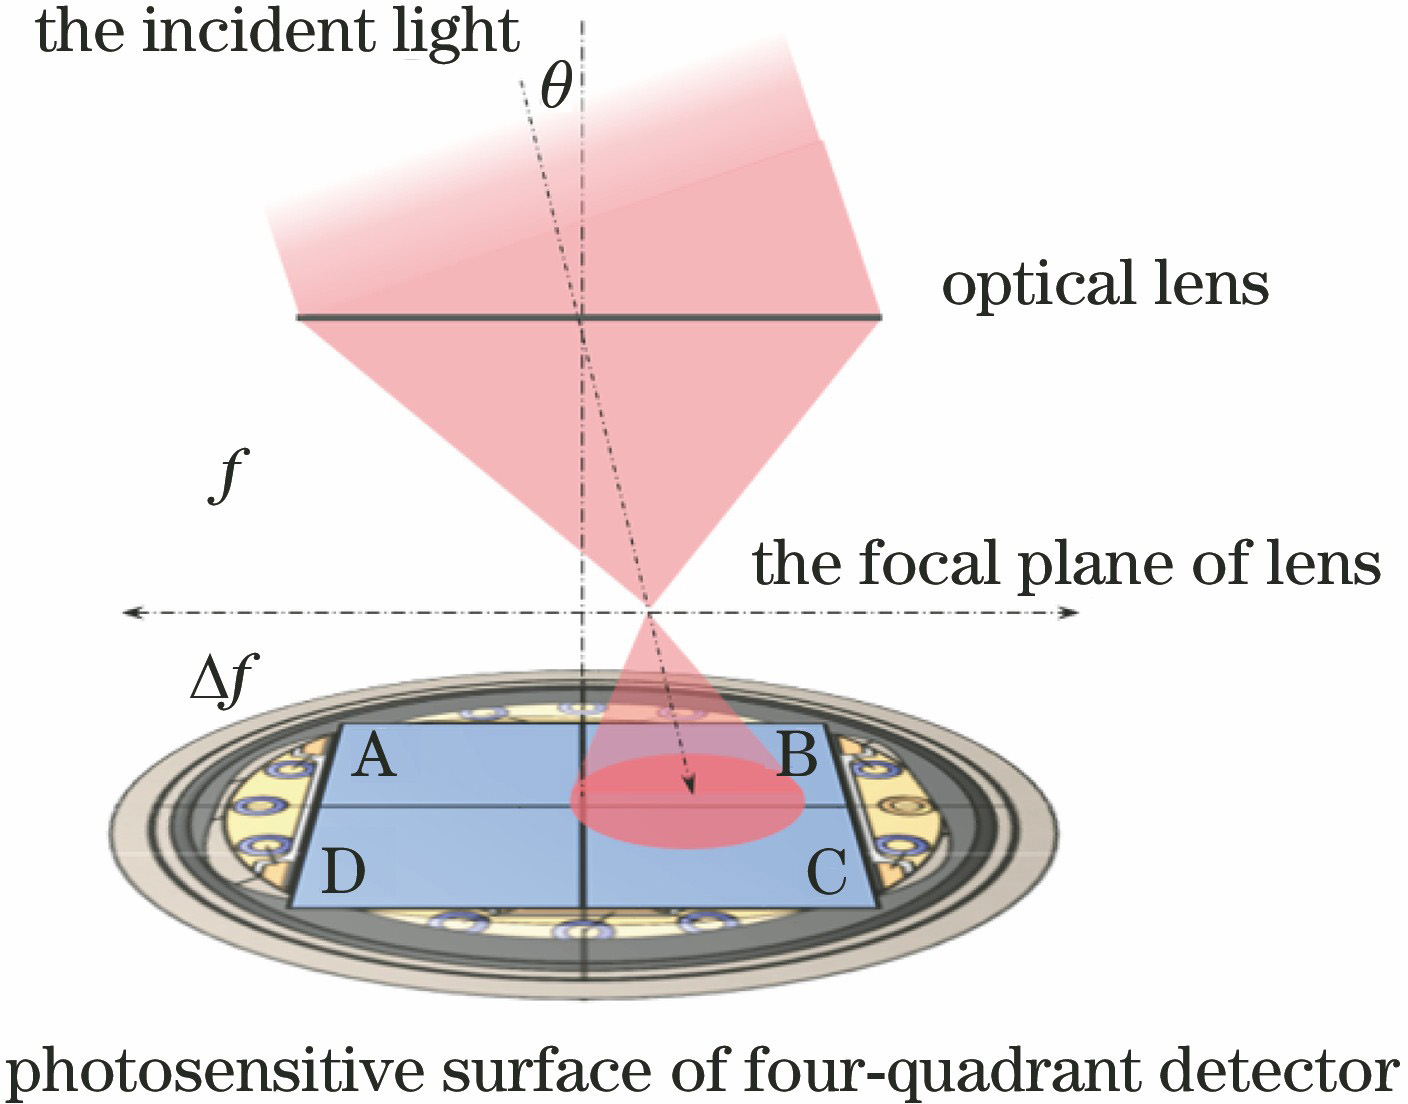 Structure of four-quadrant detector and schematic of incident light